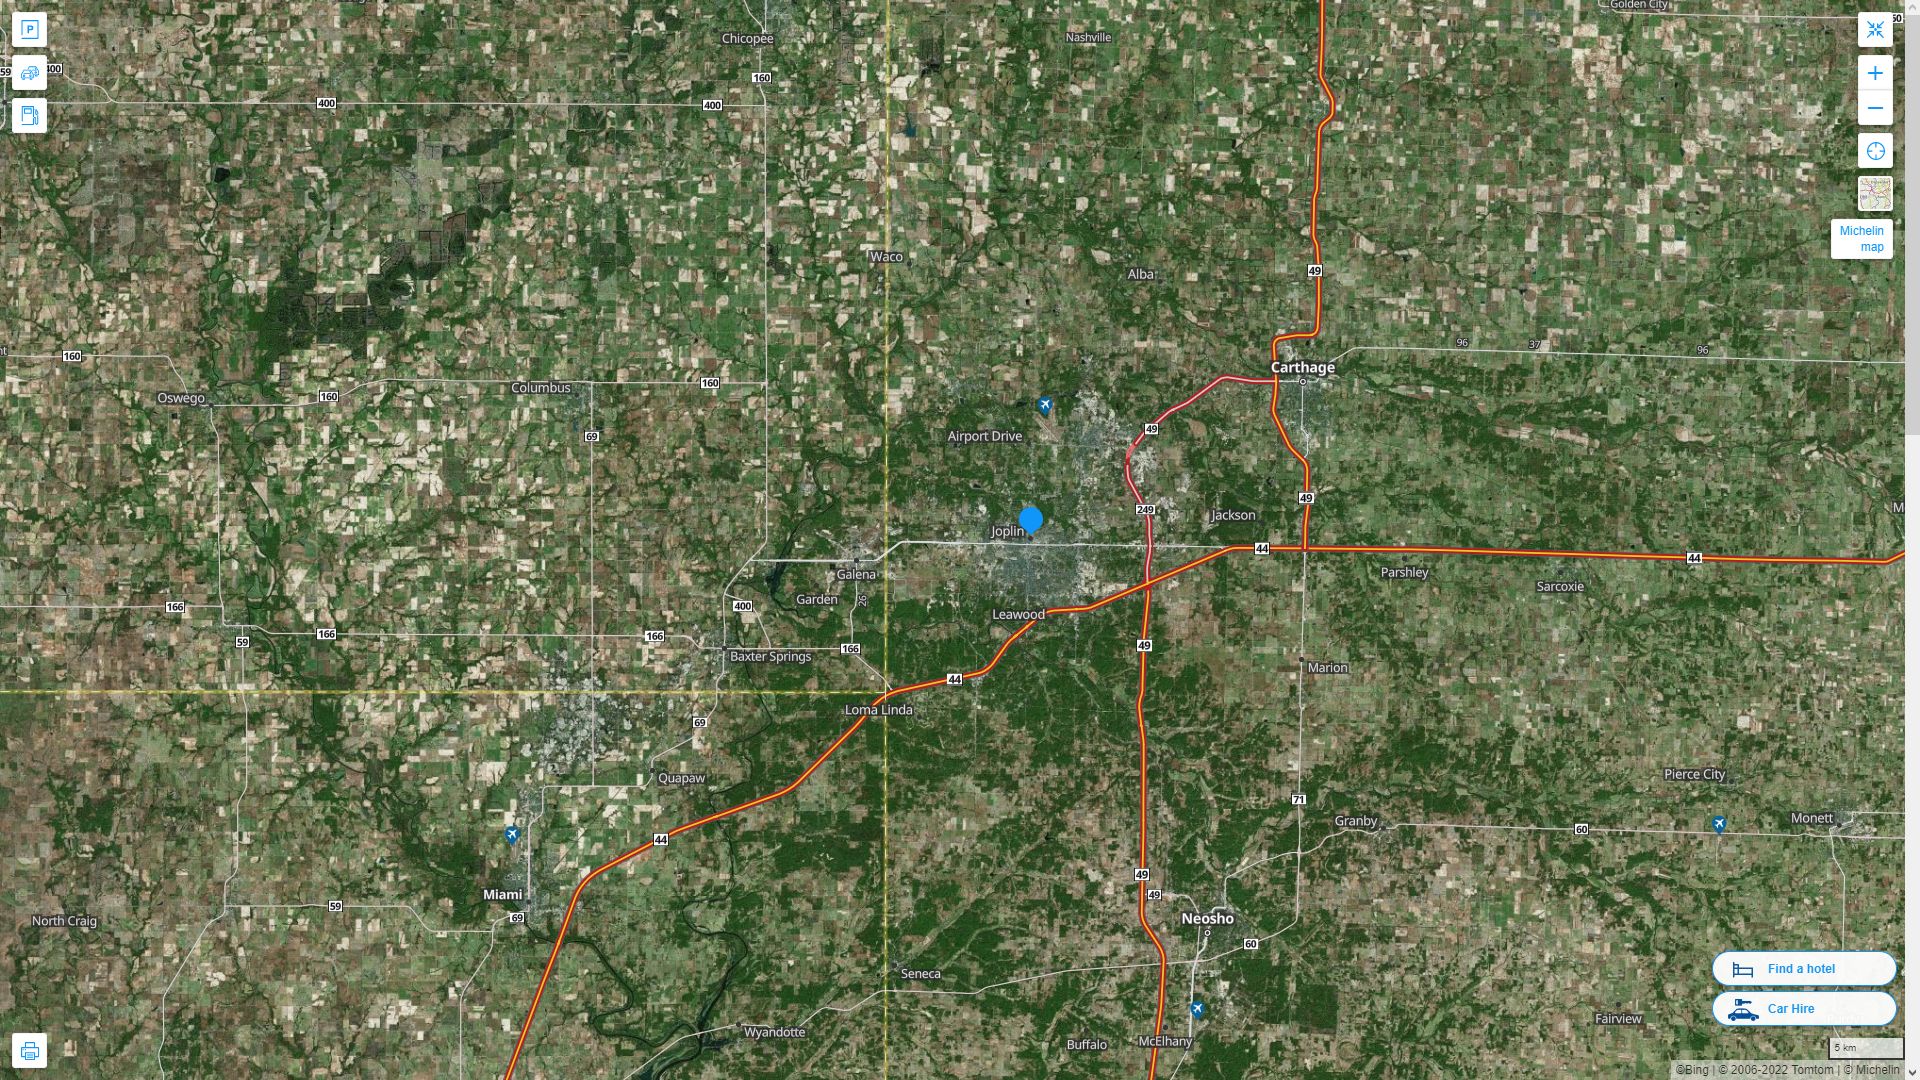 Joplin Missouri Highway and Road Map with Satellite View